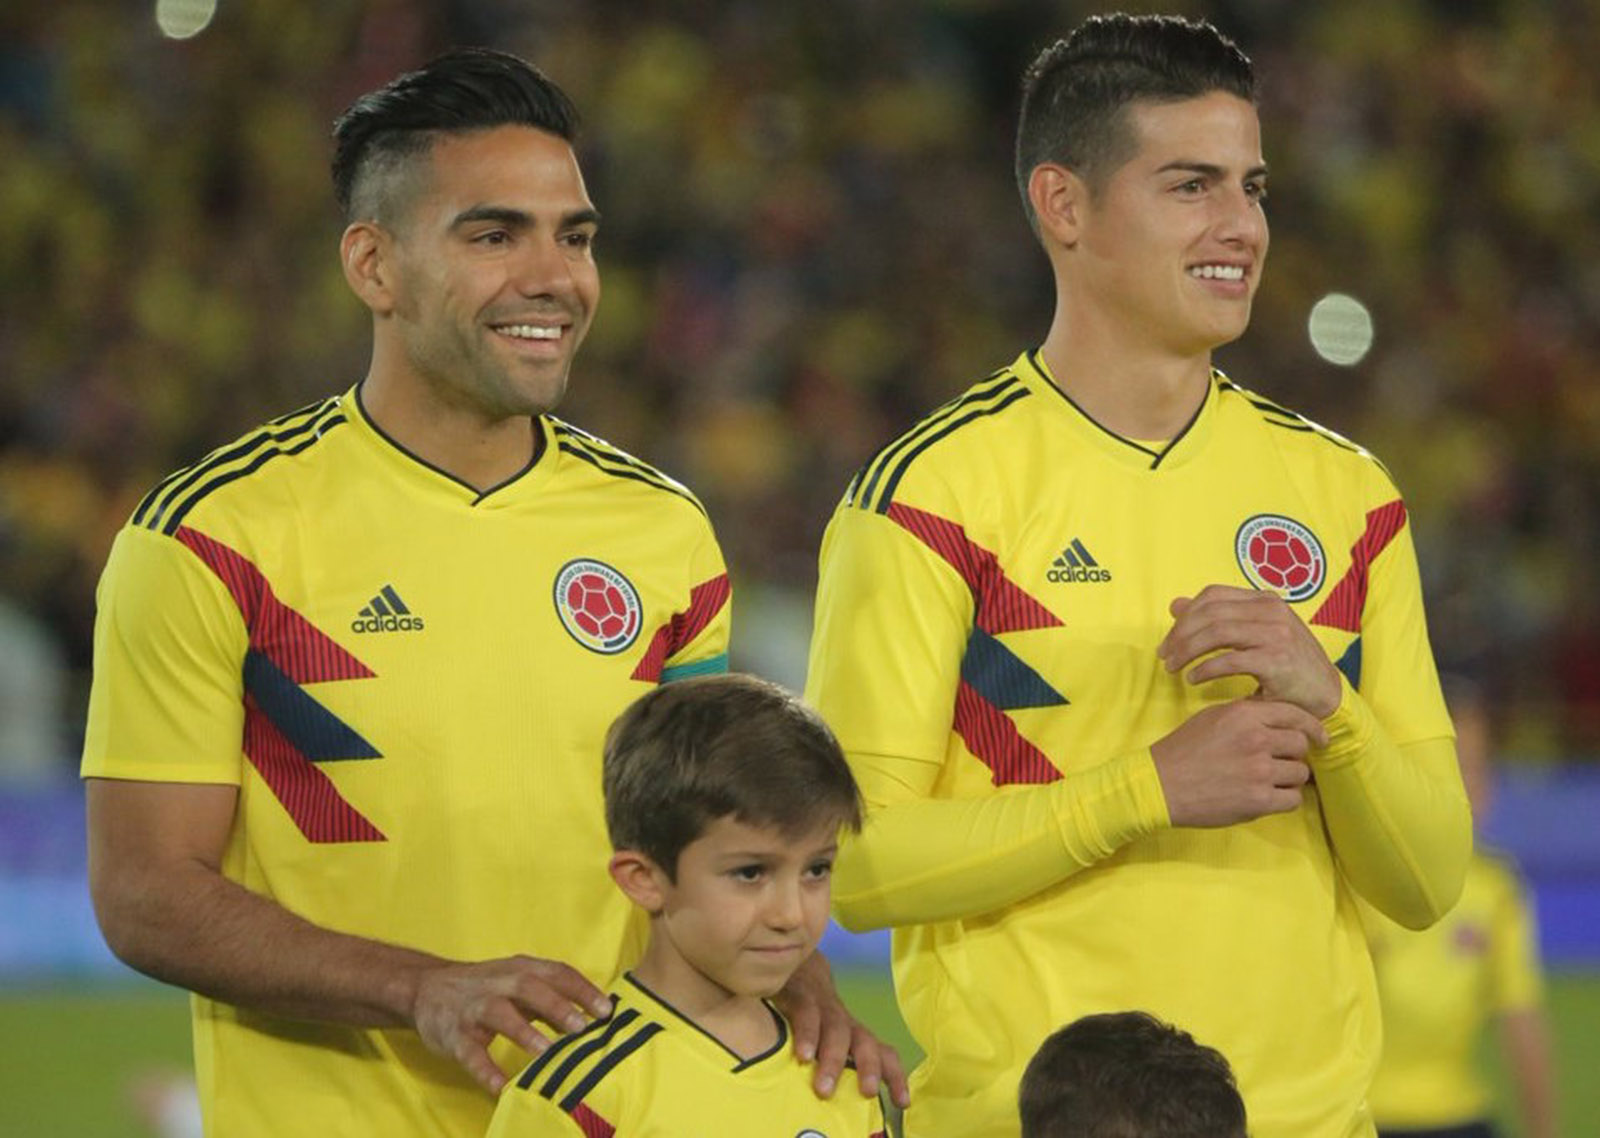 colombia soccer team jersey